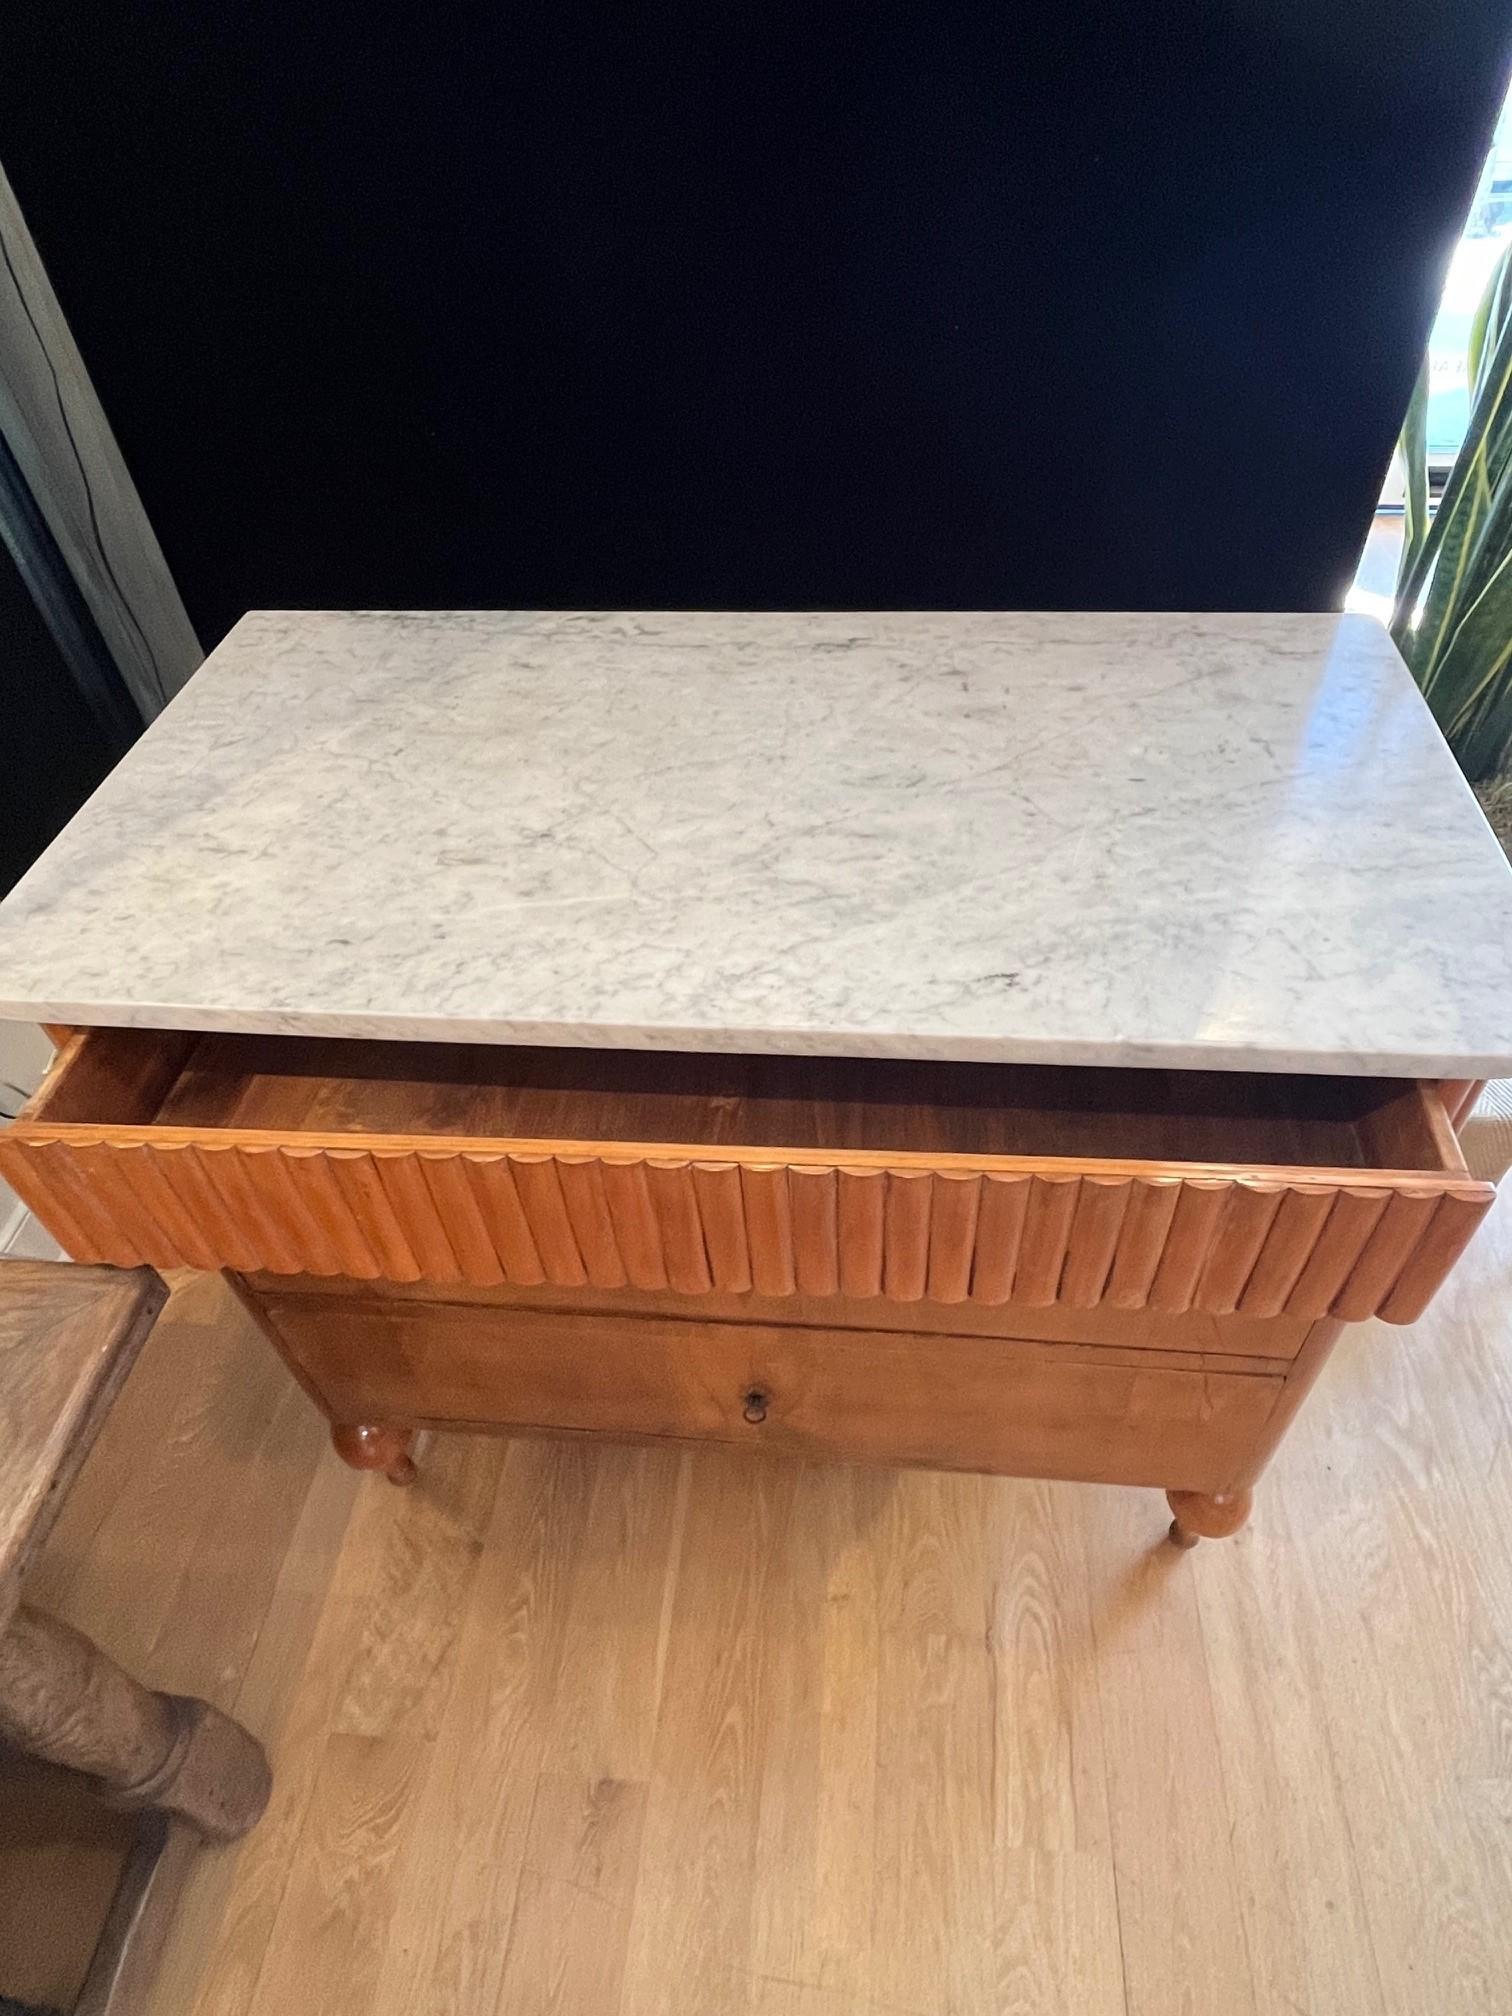 18th Century Italian Directoire Cesarone Three Drawers Chest with White Marble Top, Antique Pie Crust Fluted Edge Detail Commode or Chest with Marble Top